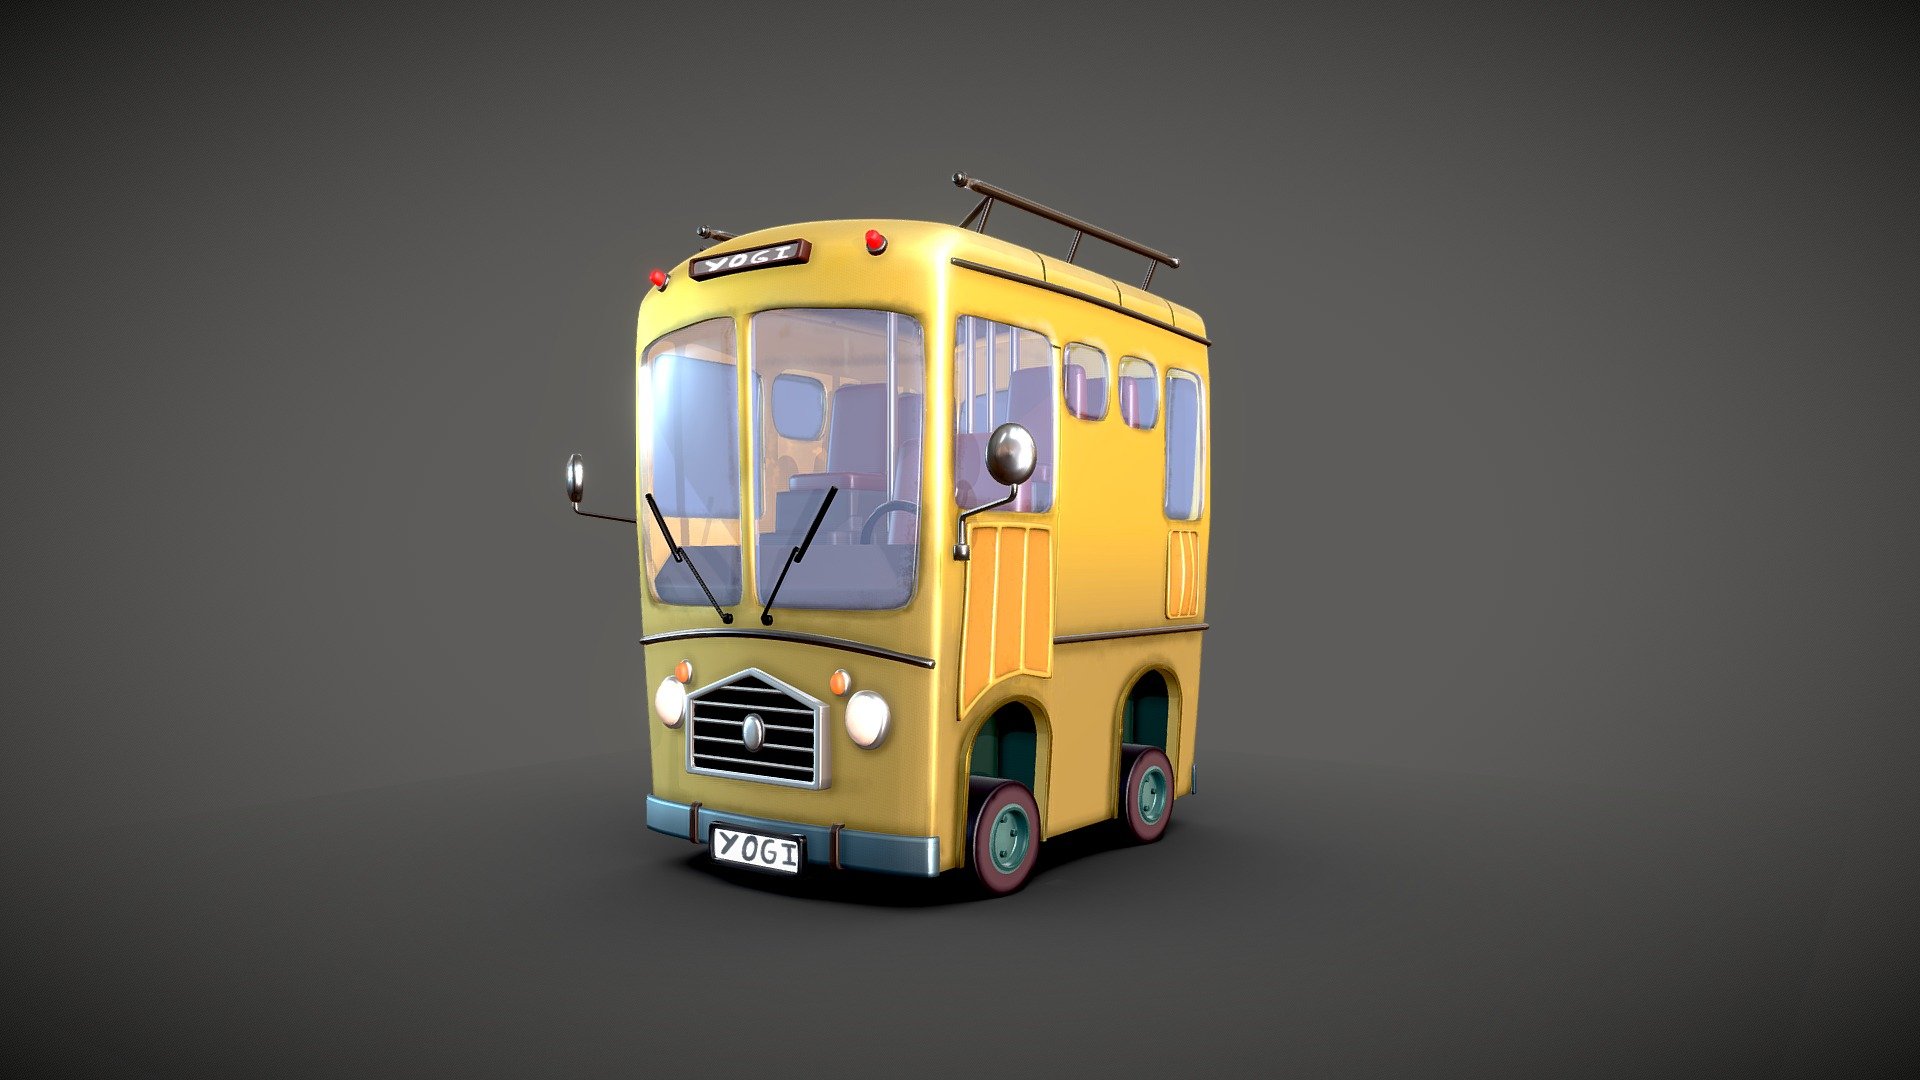 Vehicle model, inspired by Yogender Pal's concept art.
Modeling in 3ds Max, Texturing in Substance painter 3d model